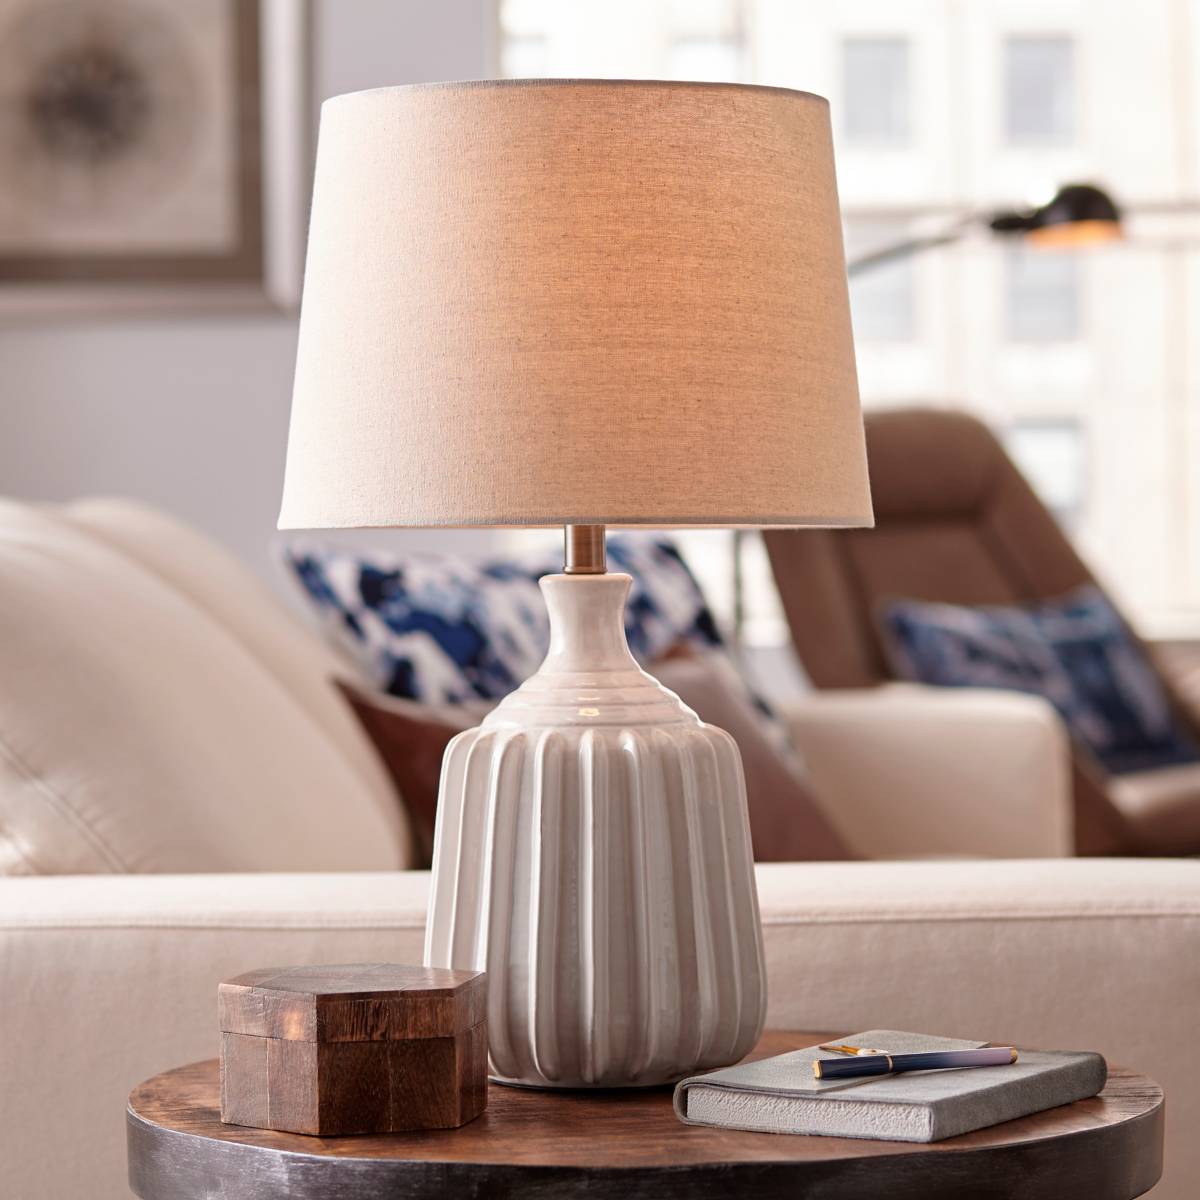 21 In. - 25 In., Mid-Century, Nightstand Lamps, Table Lamps | Lamps Plus